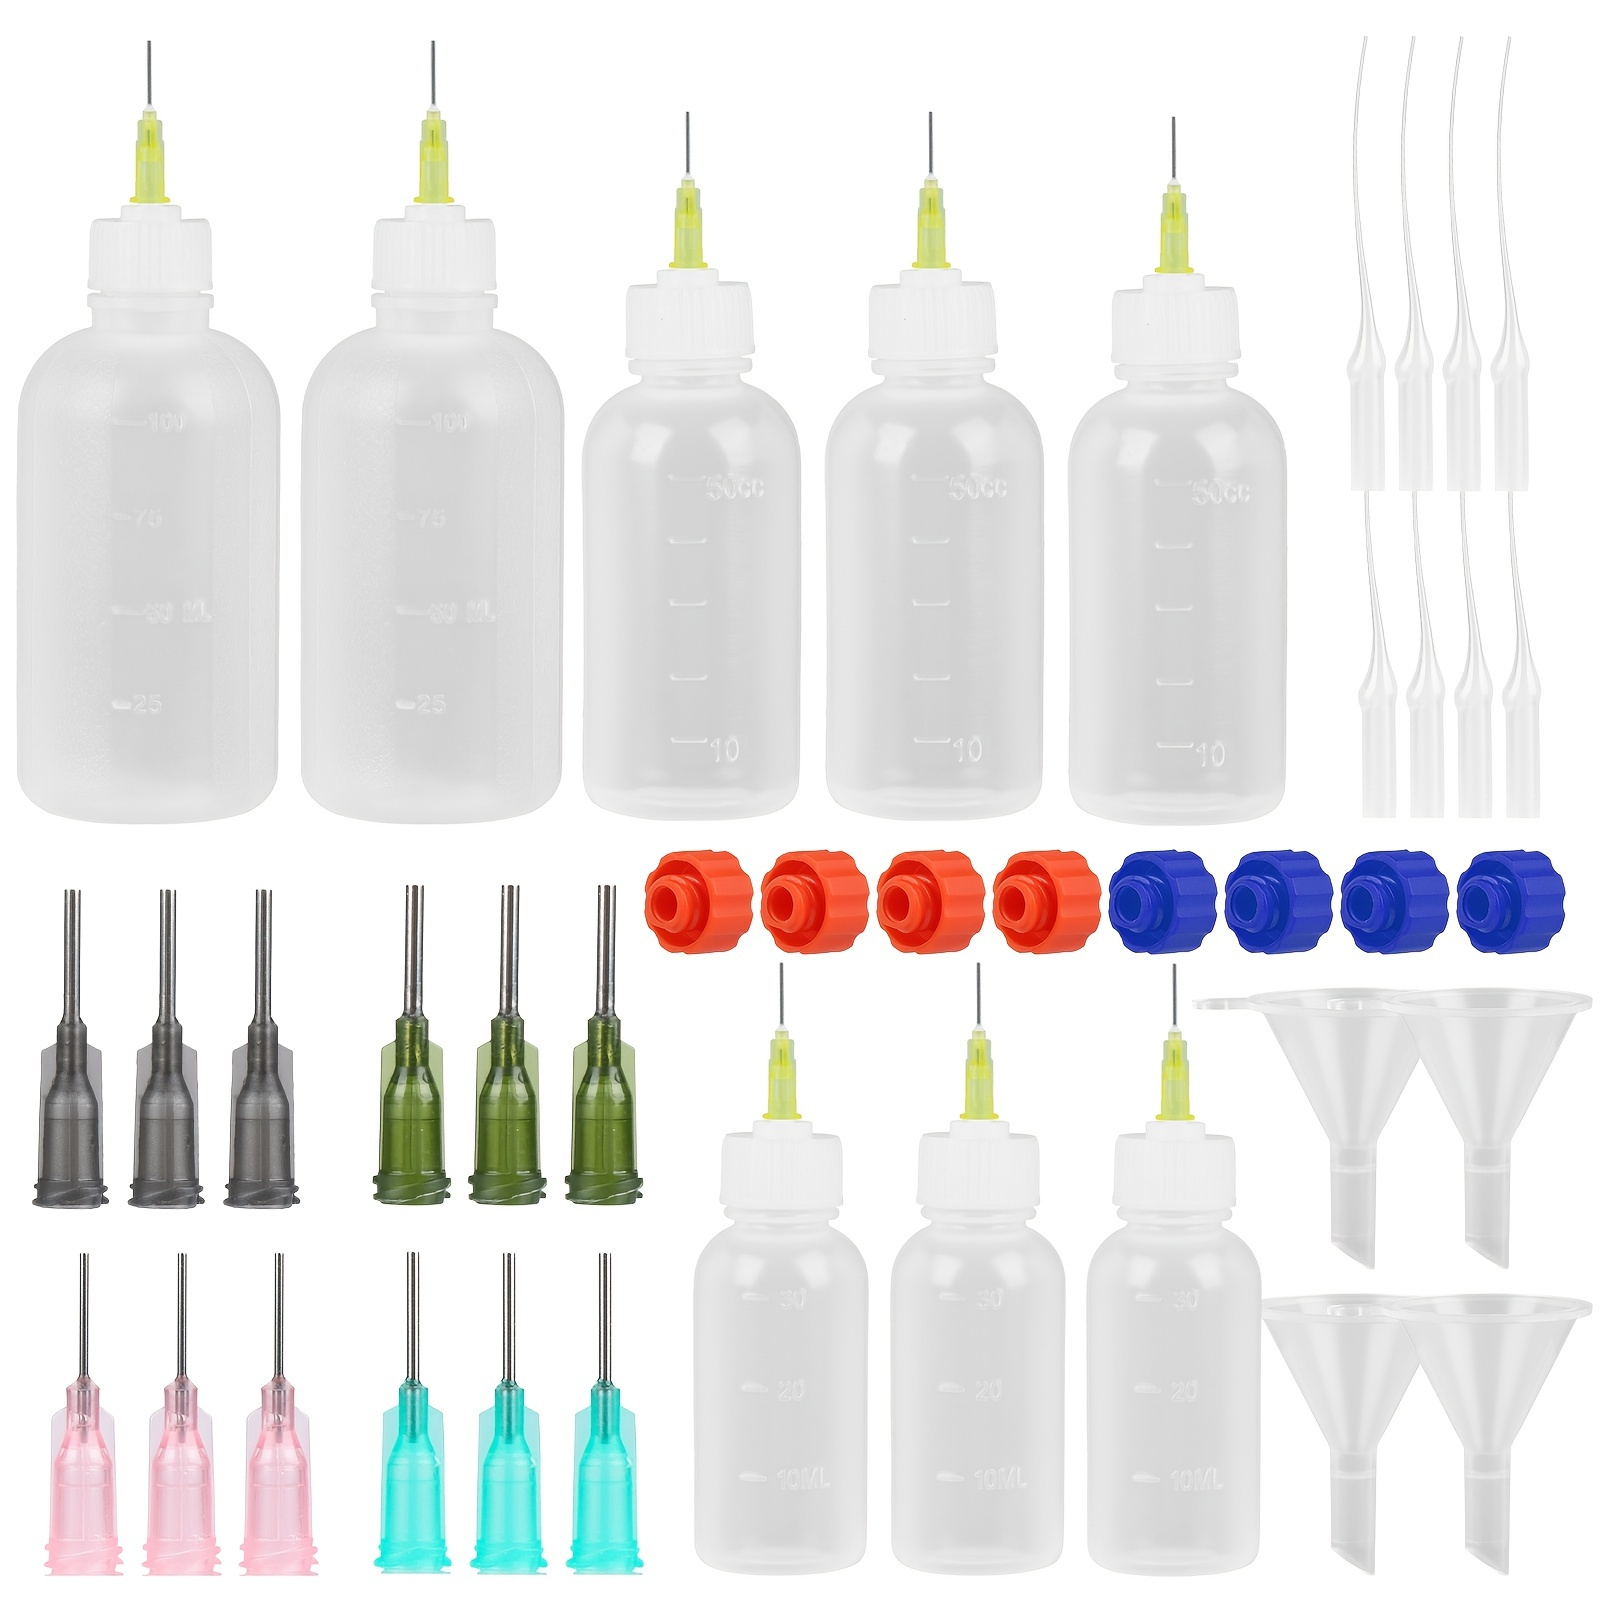 Free Hand Precision Tip Applicator Bottle 1 Oz. 4 Needle Tip Squeeze  Bottles and 12 Tips for Acrylic Painting, DIY Quilling and Paper Craft